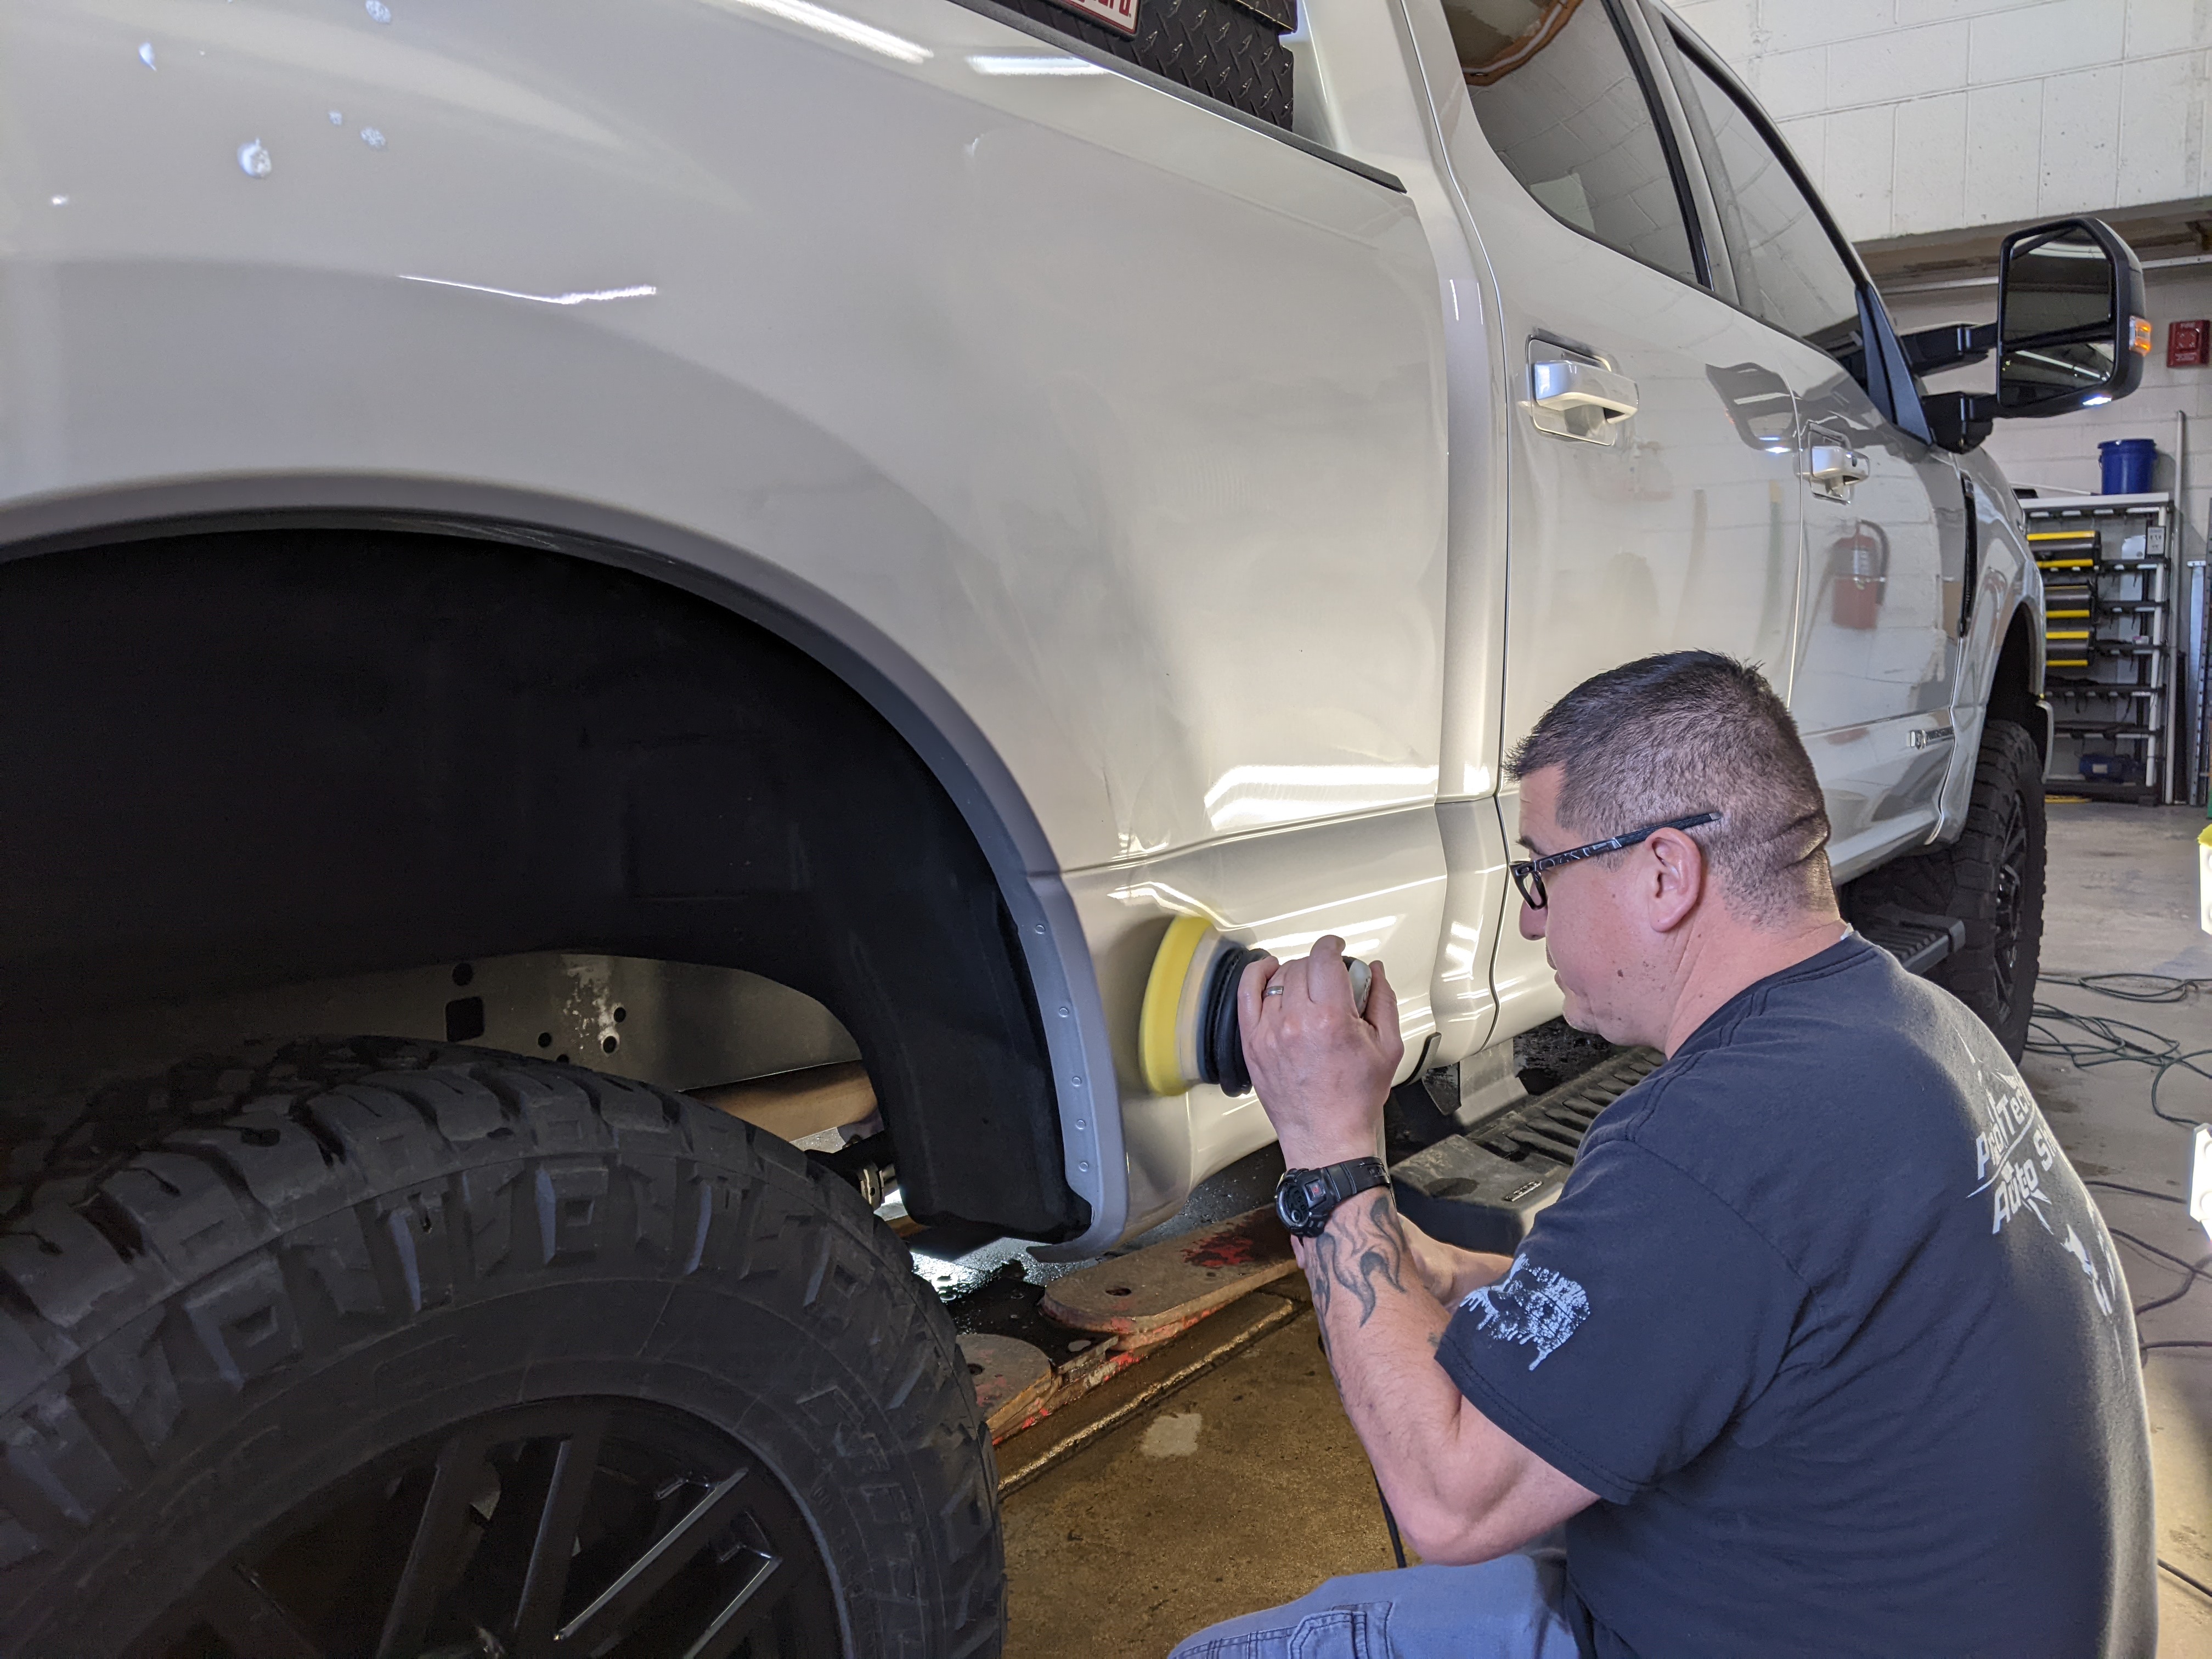 2019 Ford F-250 getting a light polish prior to applying Ceramic Pro Top Coat.